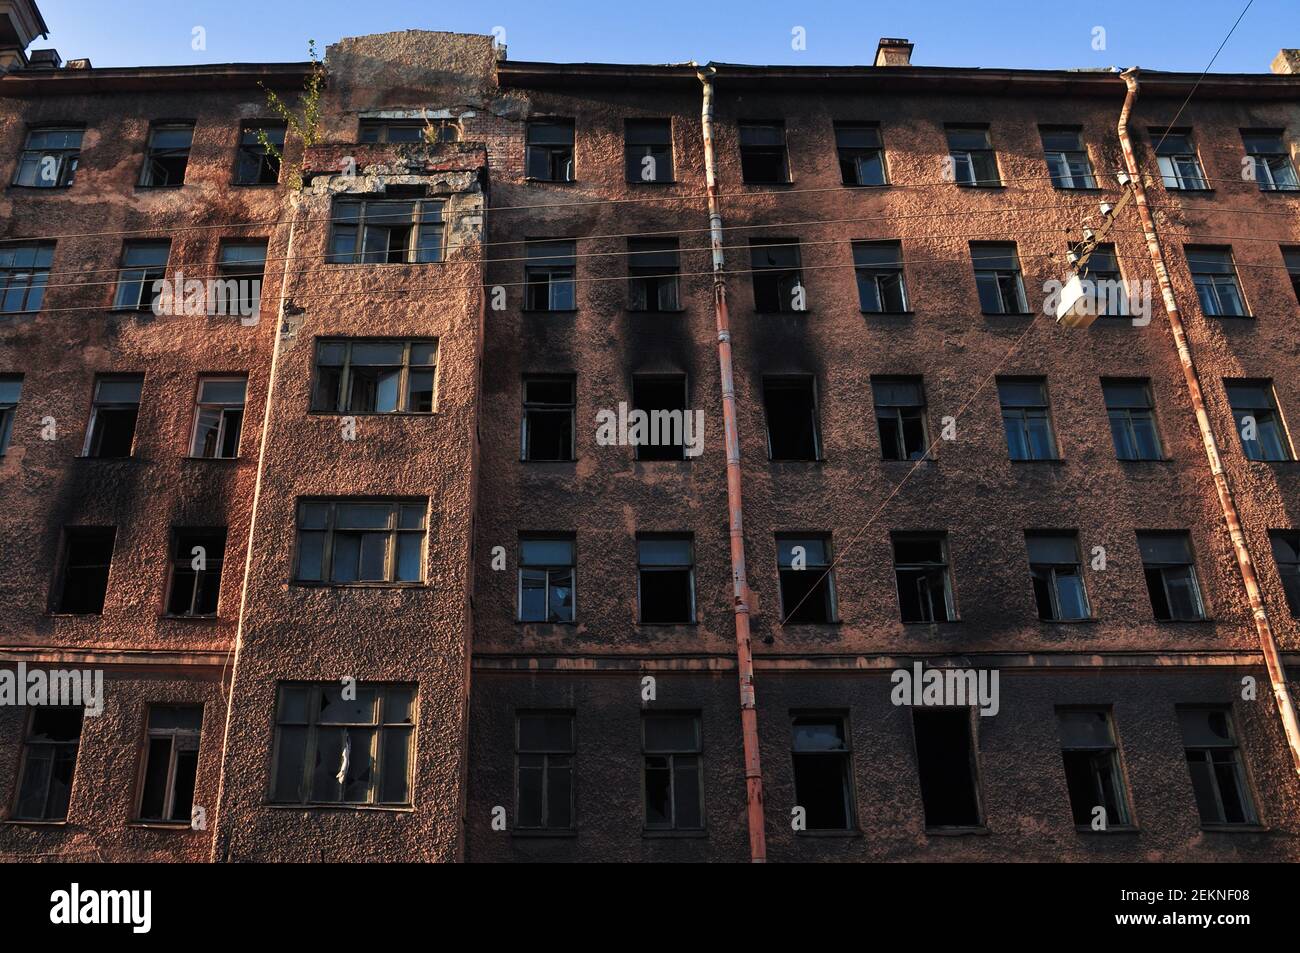 Facade of abandoned rmulti-storey building after fire Stock Photo